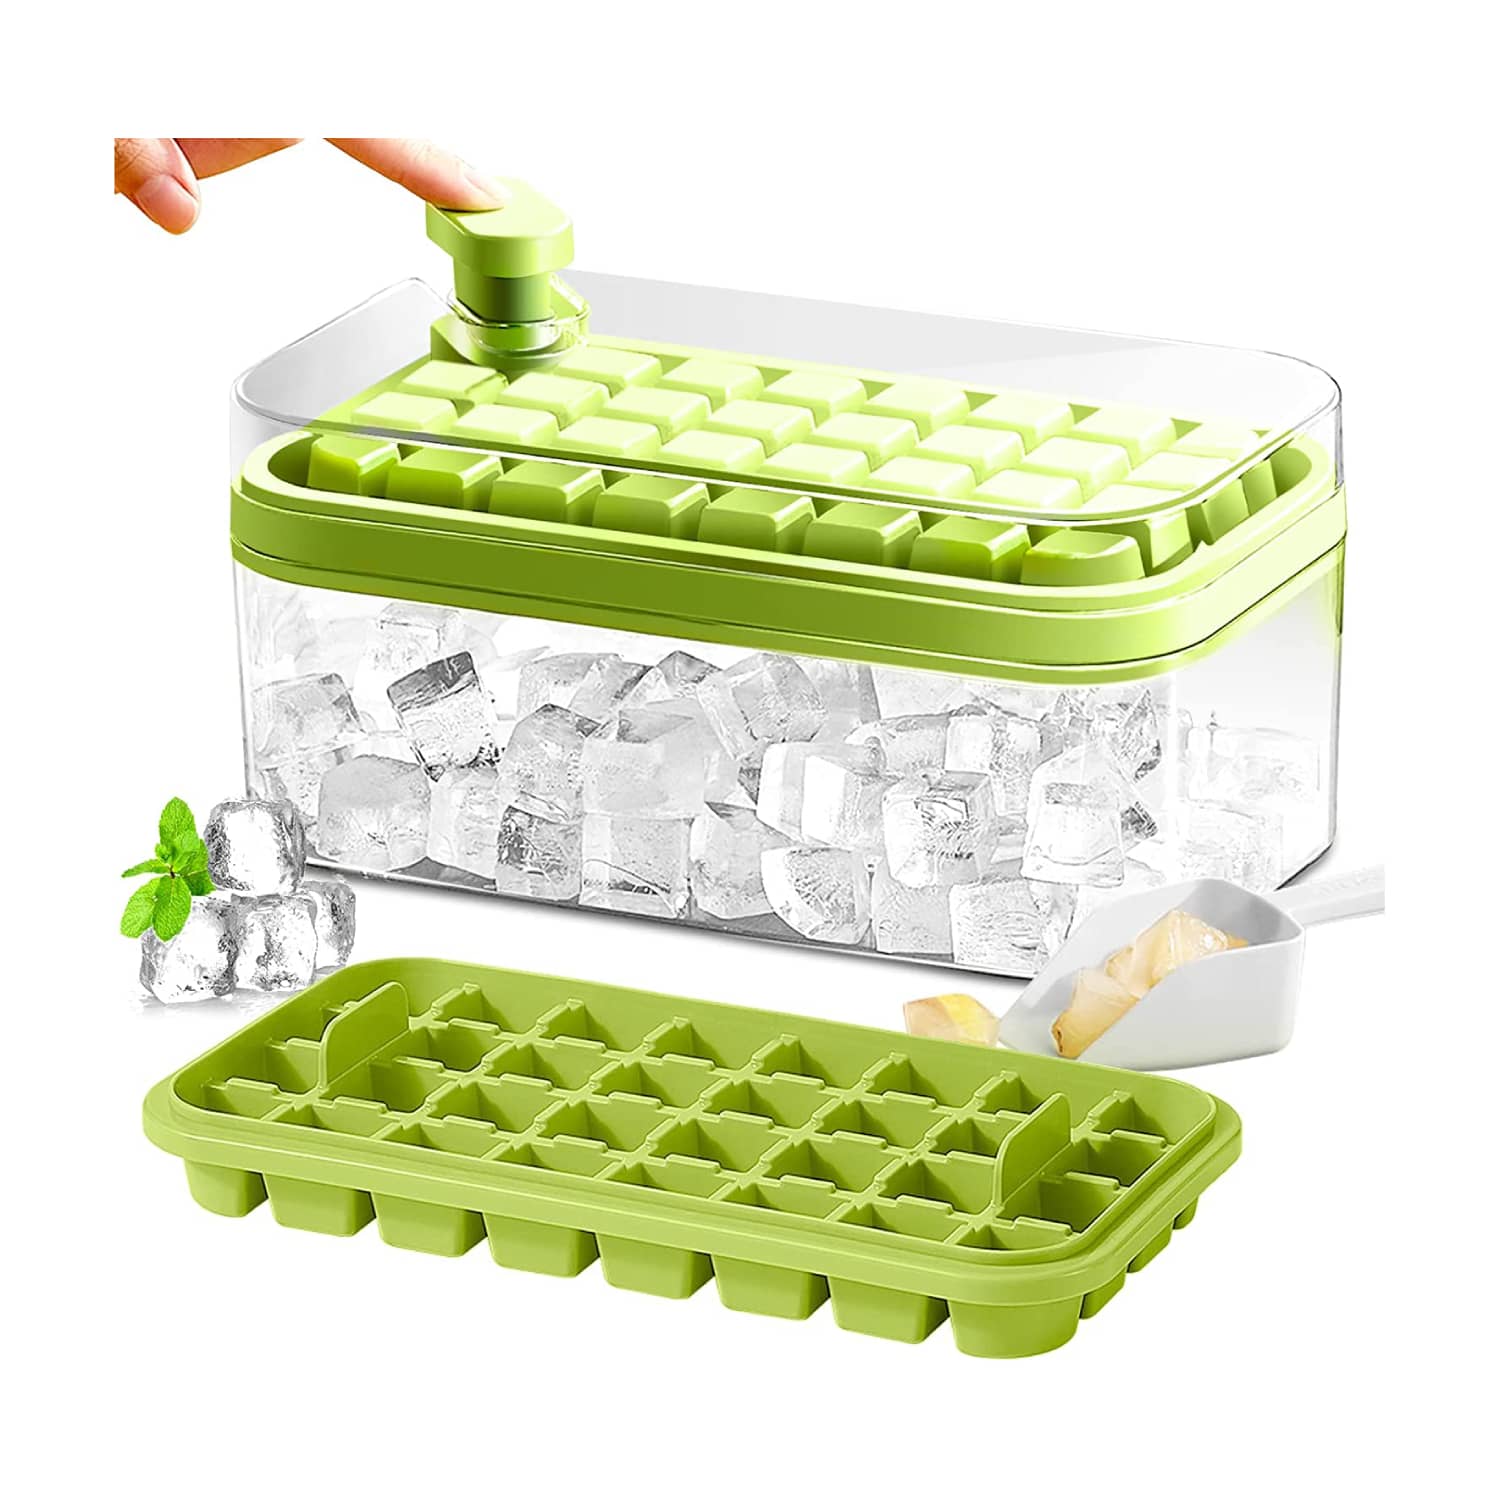 Doonly Ice Cube Tray Releases Ice with a Single Touch